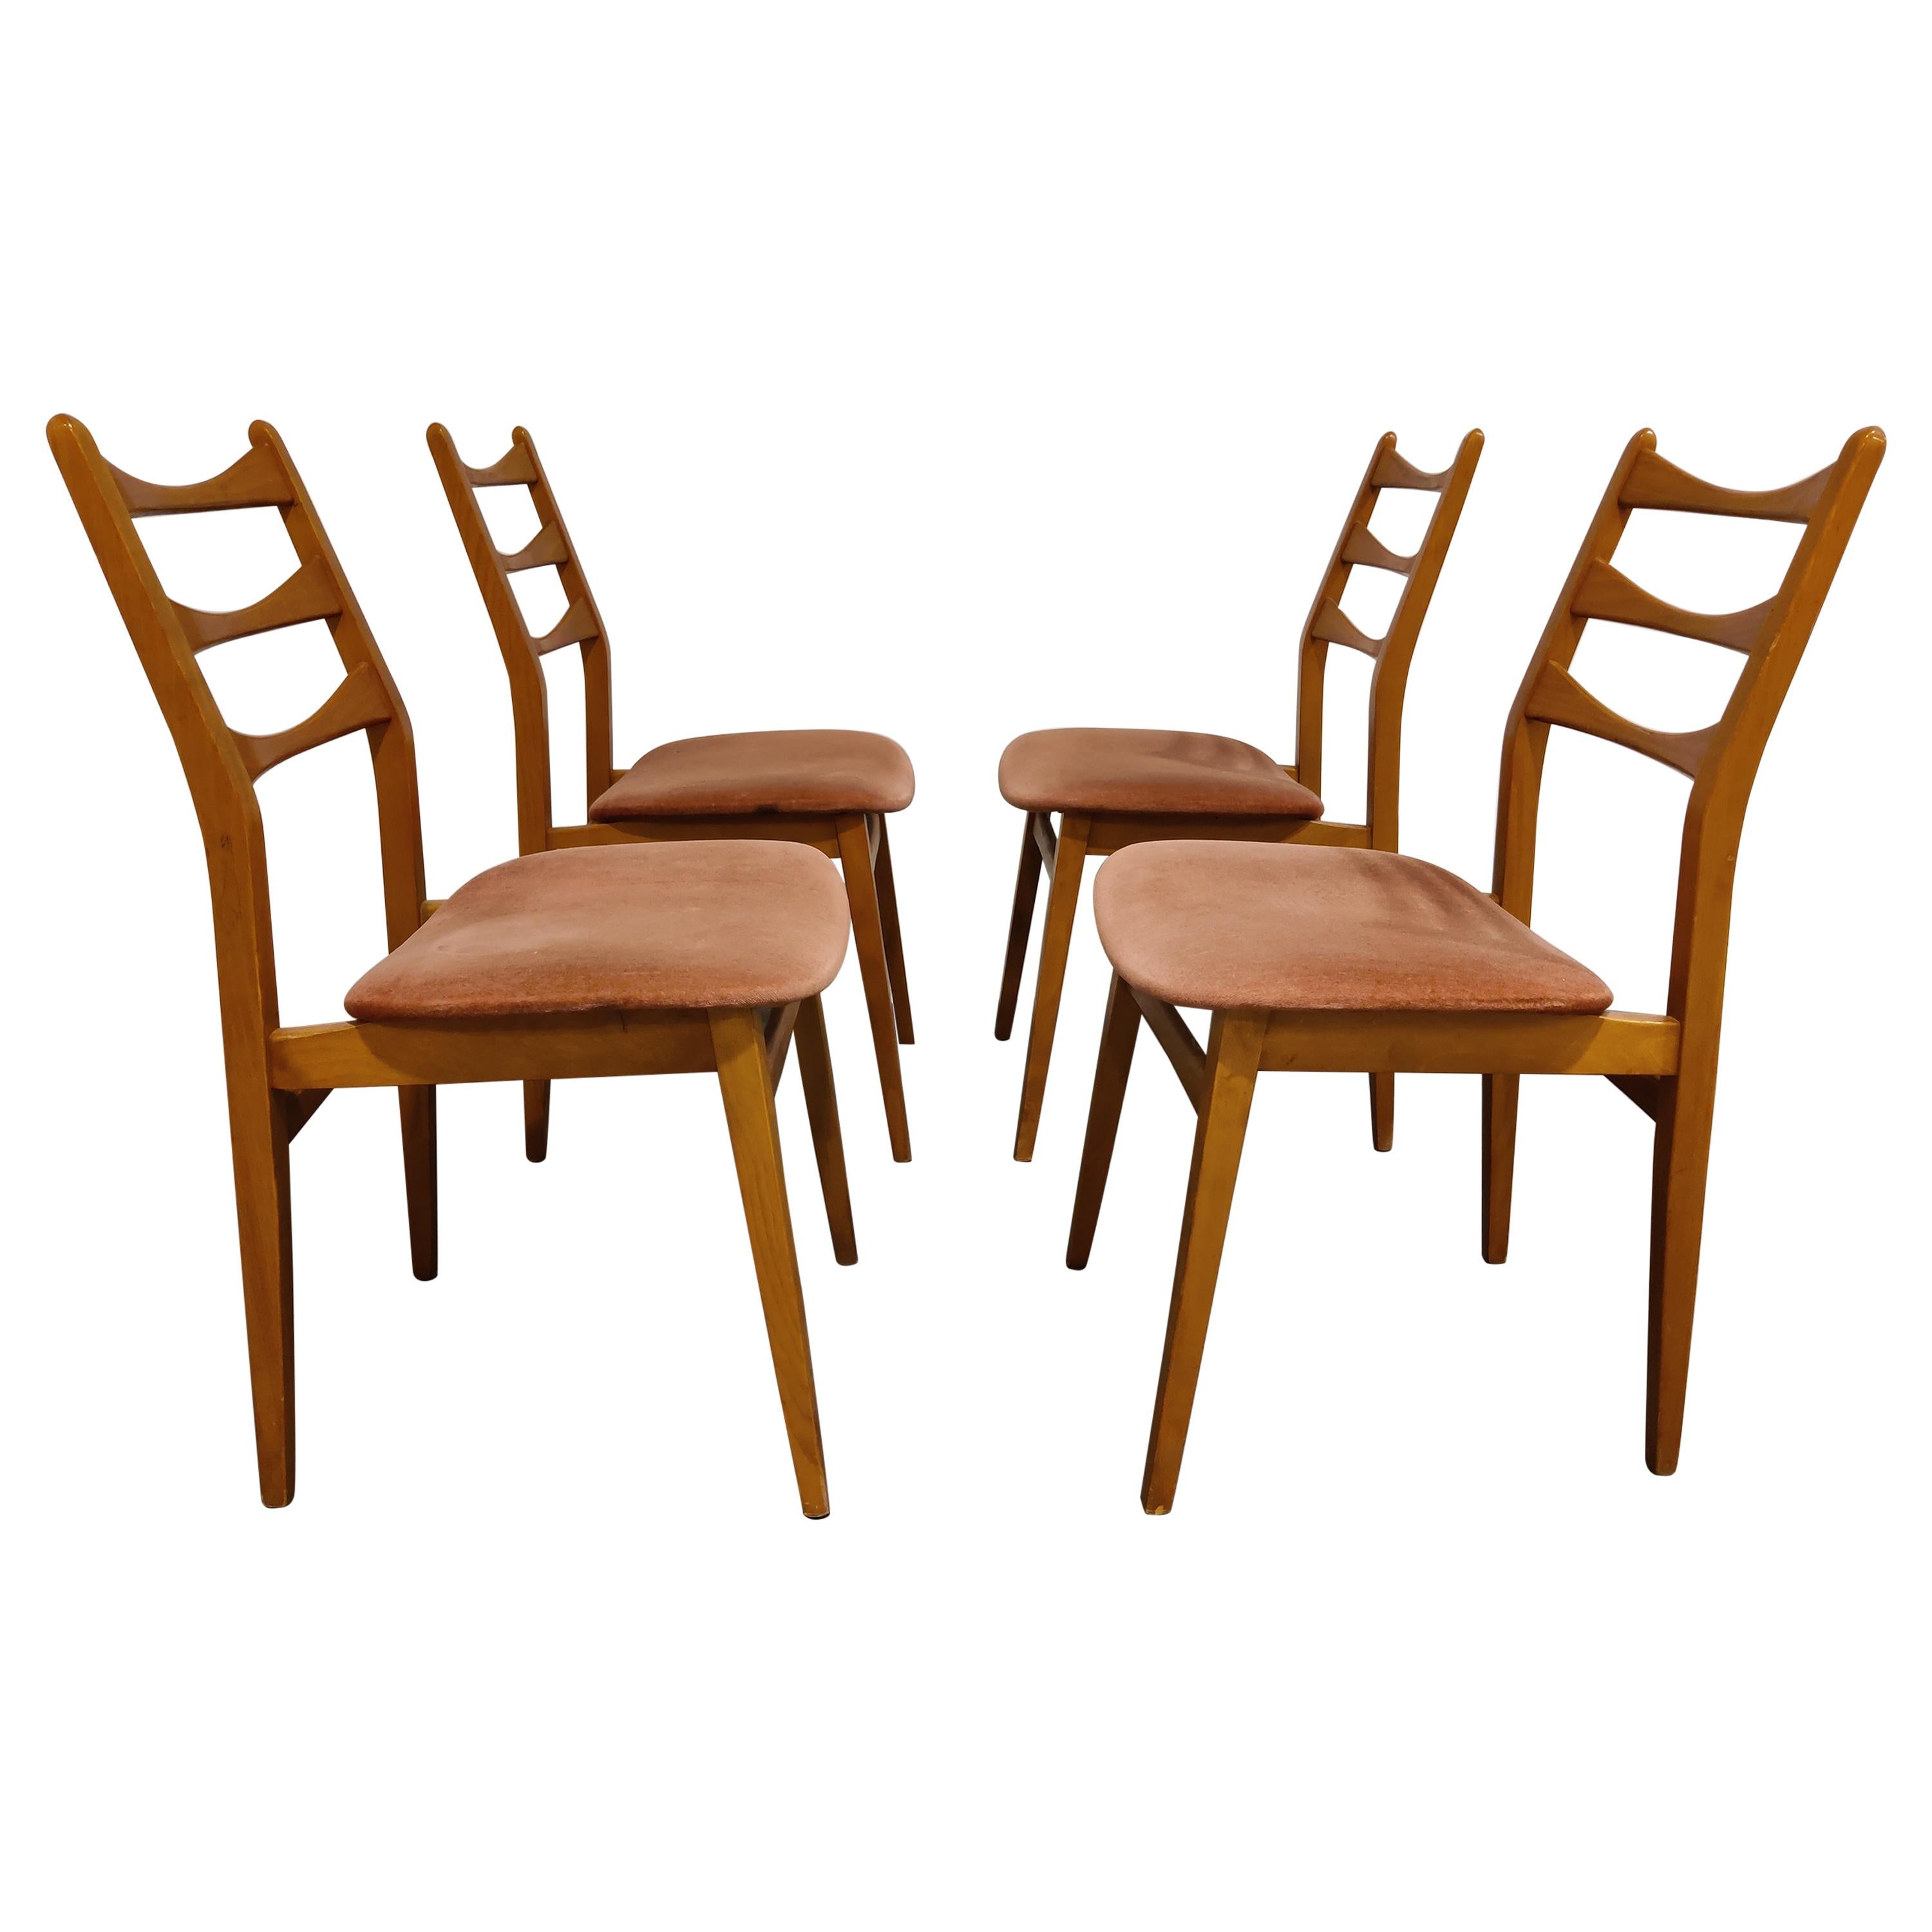 Set of 4 Vintage Dining Chairs, 1960s